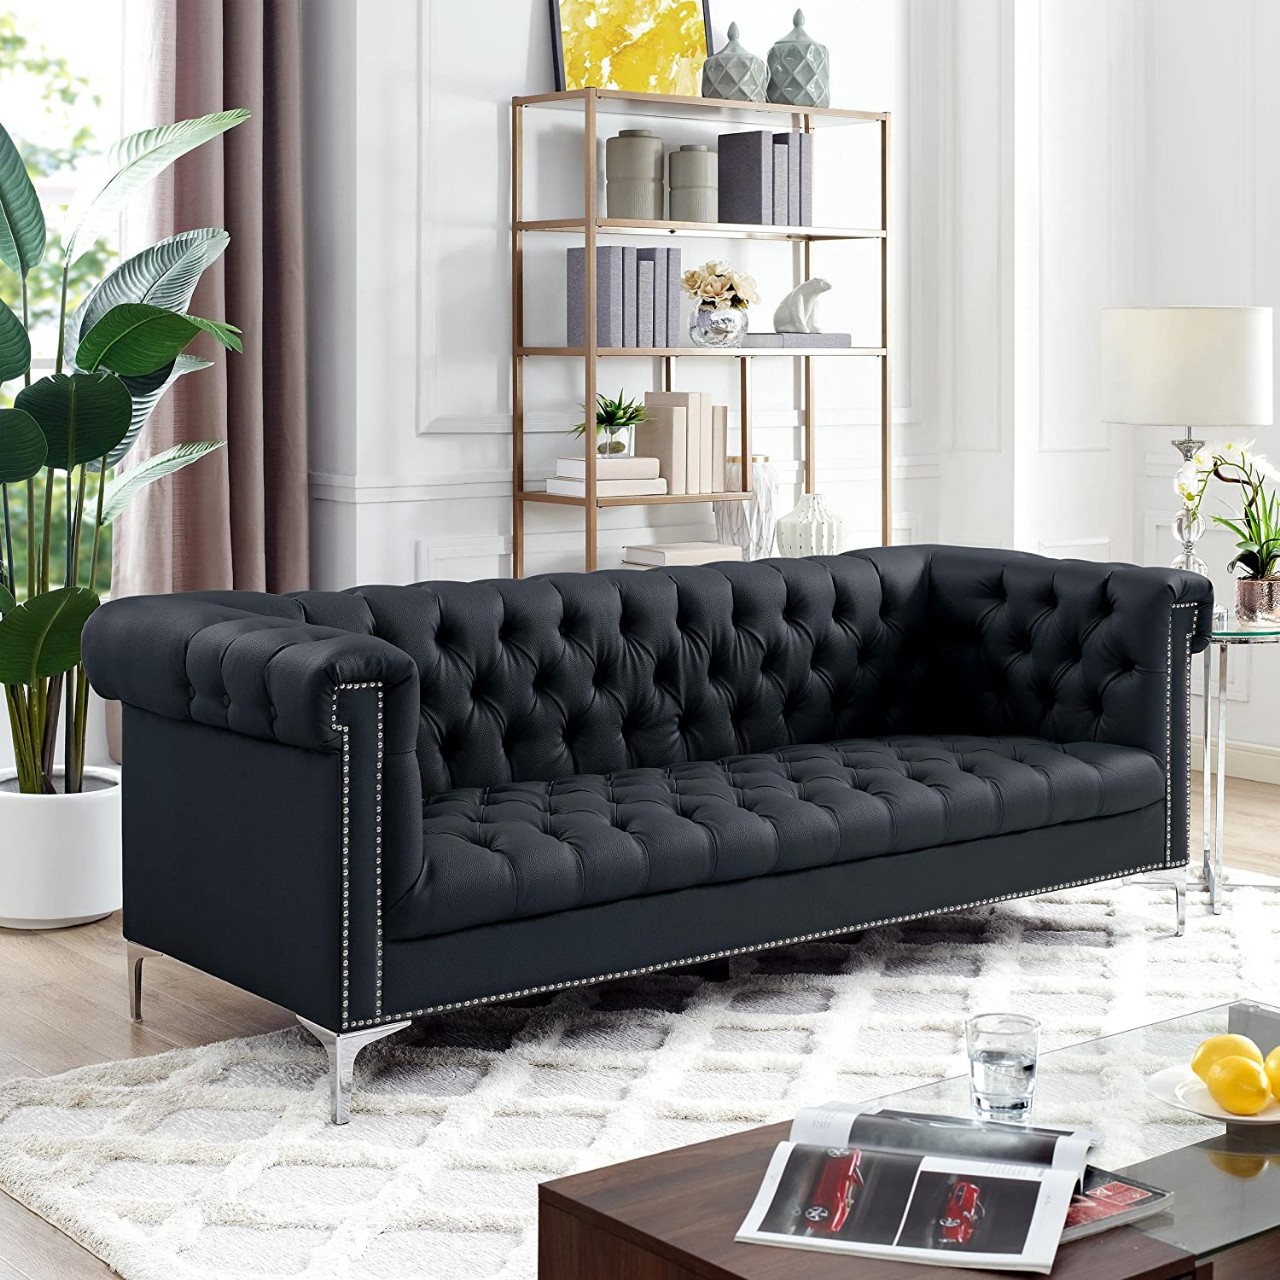 Chesterfield Leather Button Tufted Sofa with Silver Nailhead Trim and Y-leg, Black